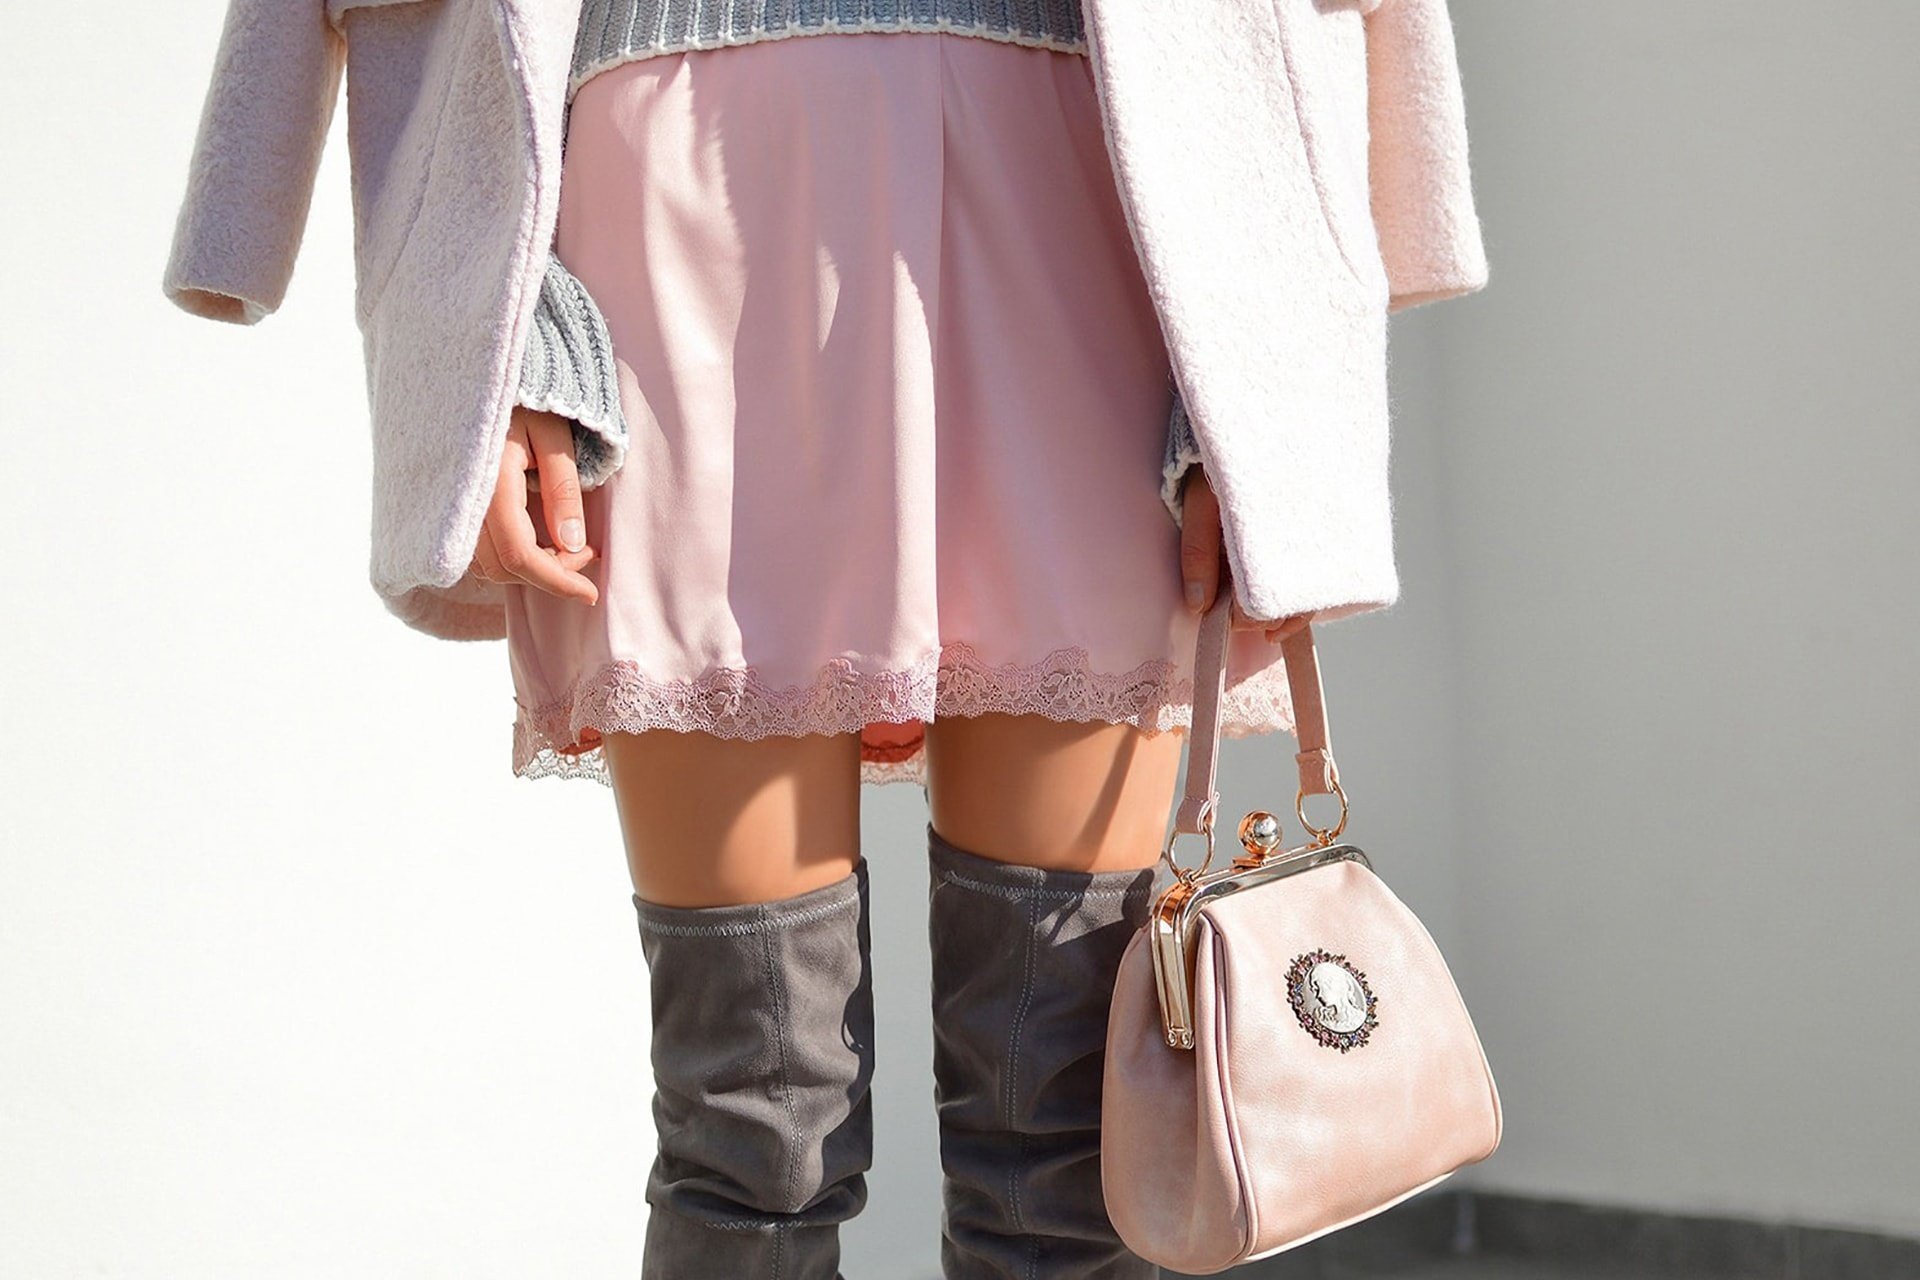 Woman wearing a pink dress and grey boots